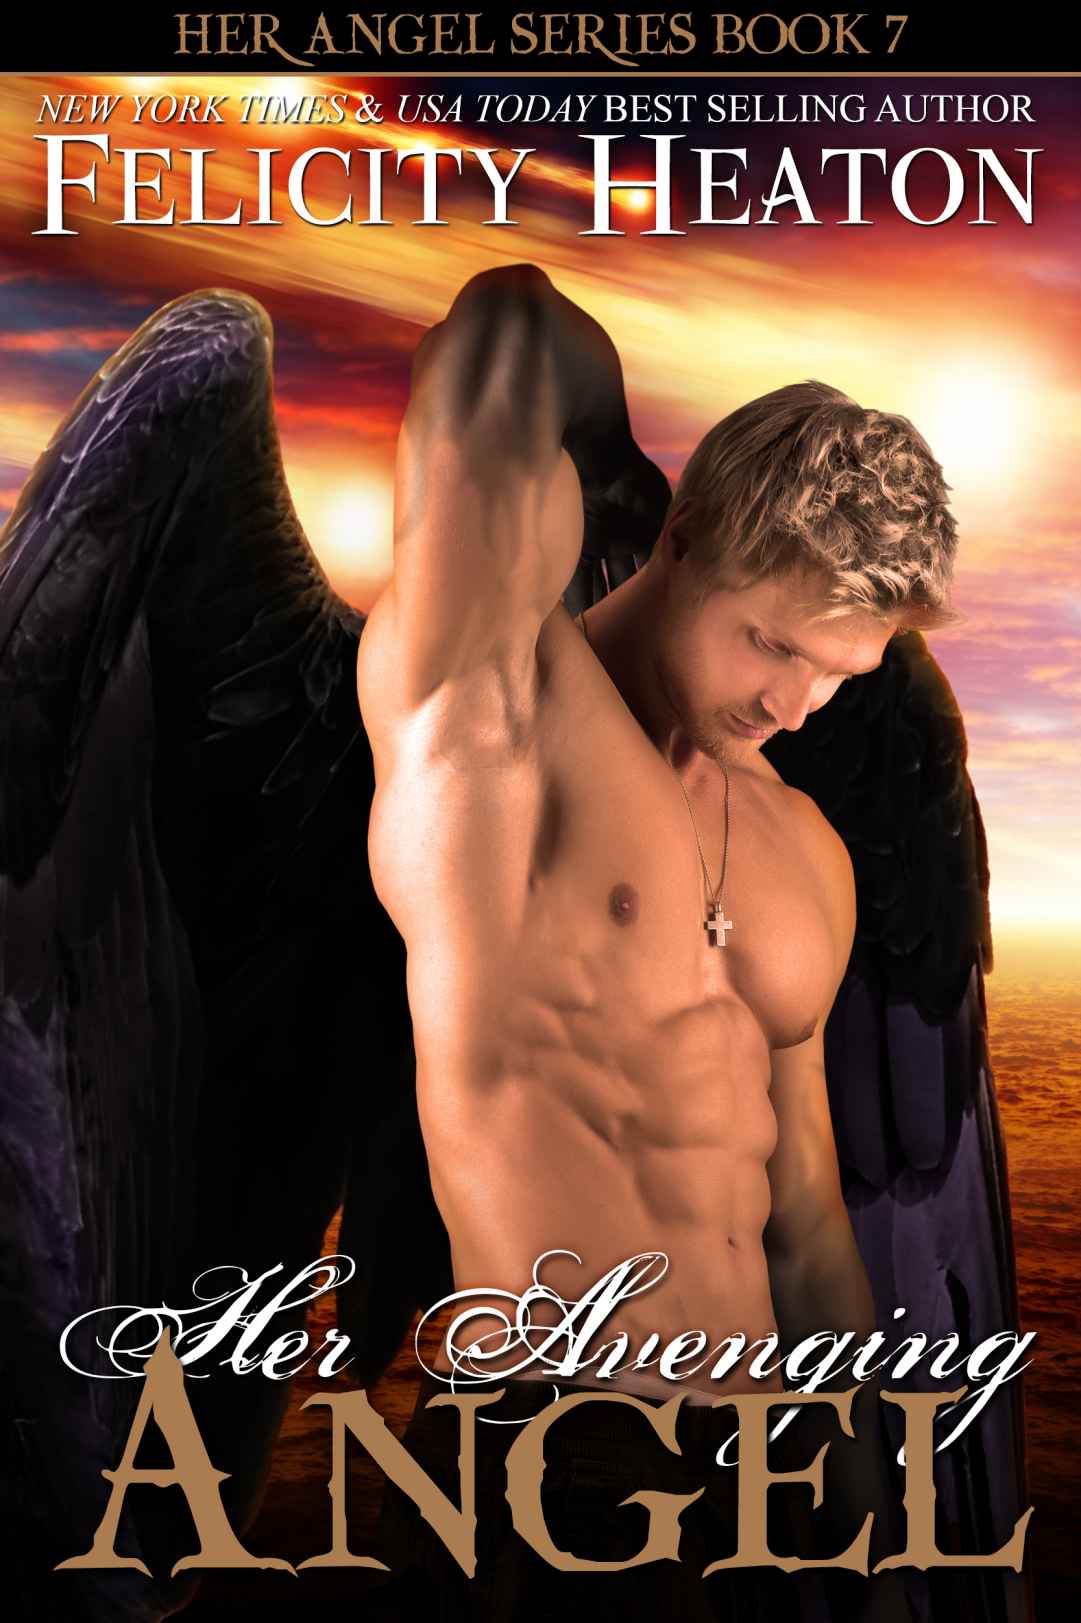 Her Avenging Angel (Her Angel Romance Series Book 7) by Felicity Heaton